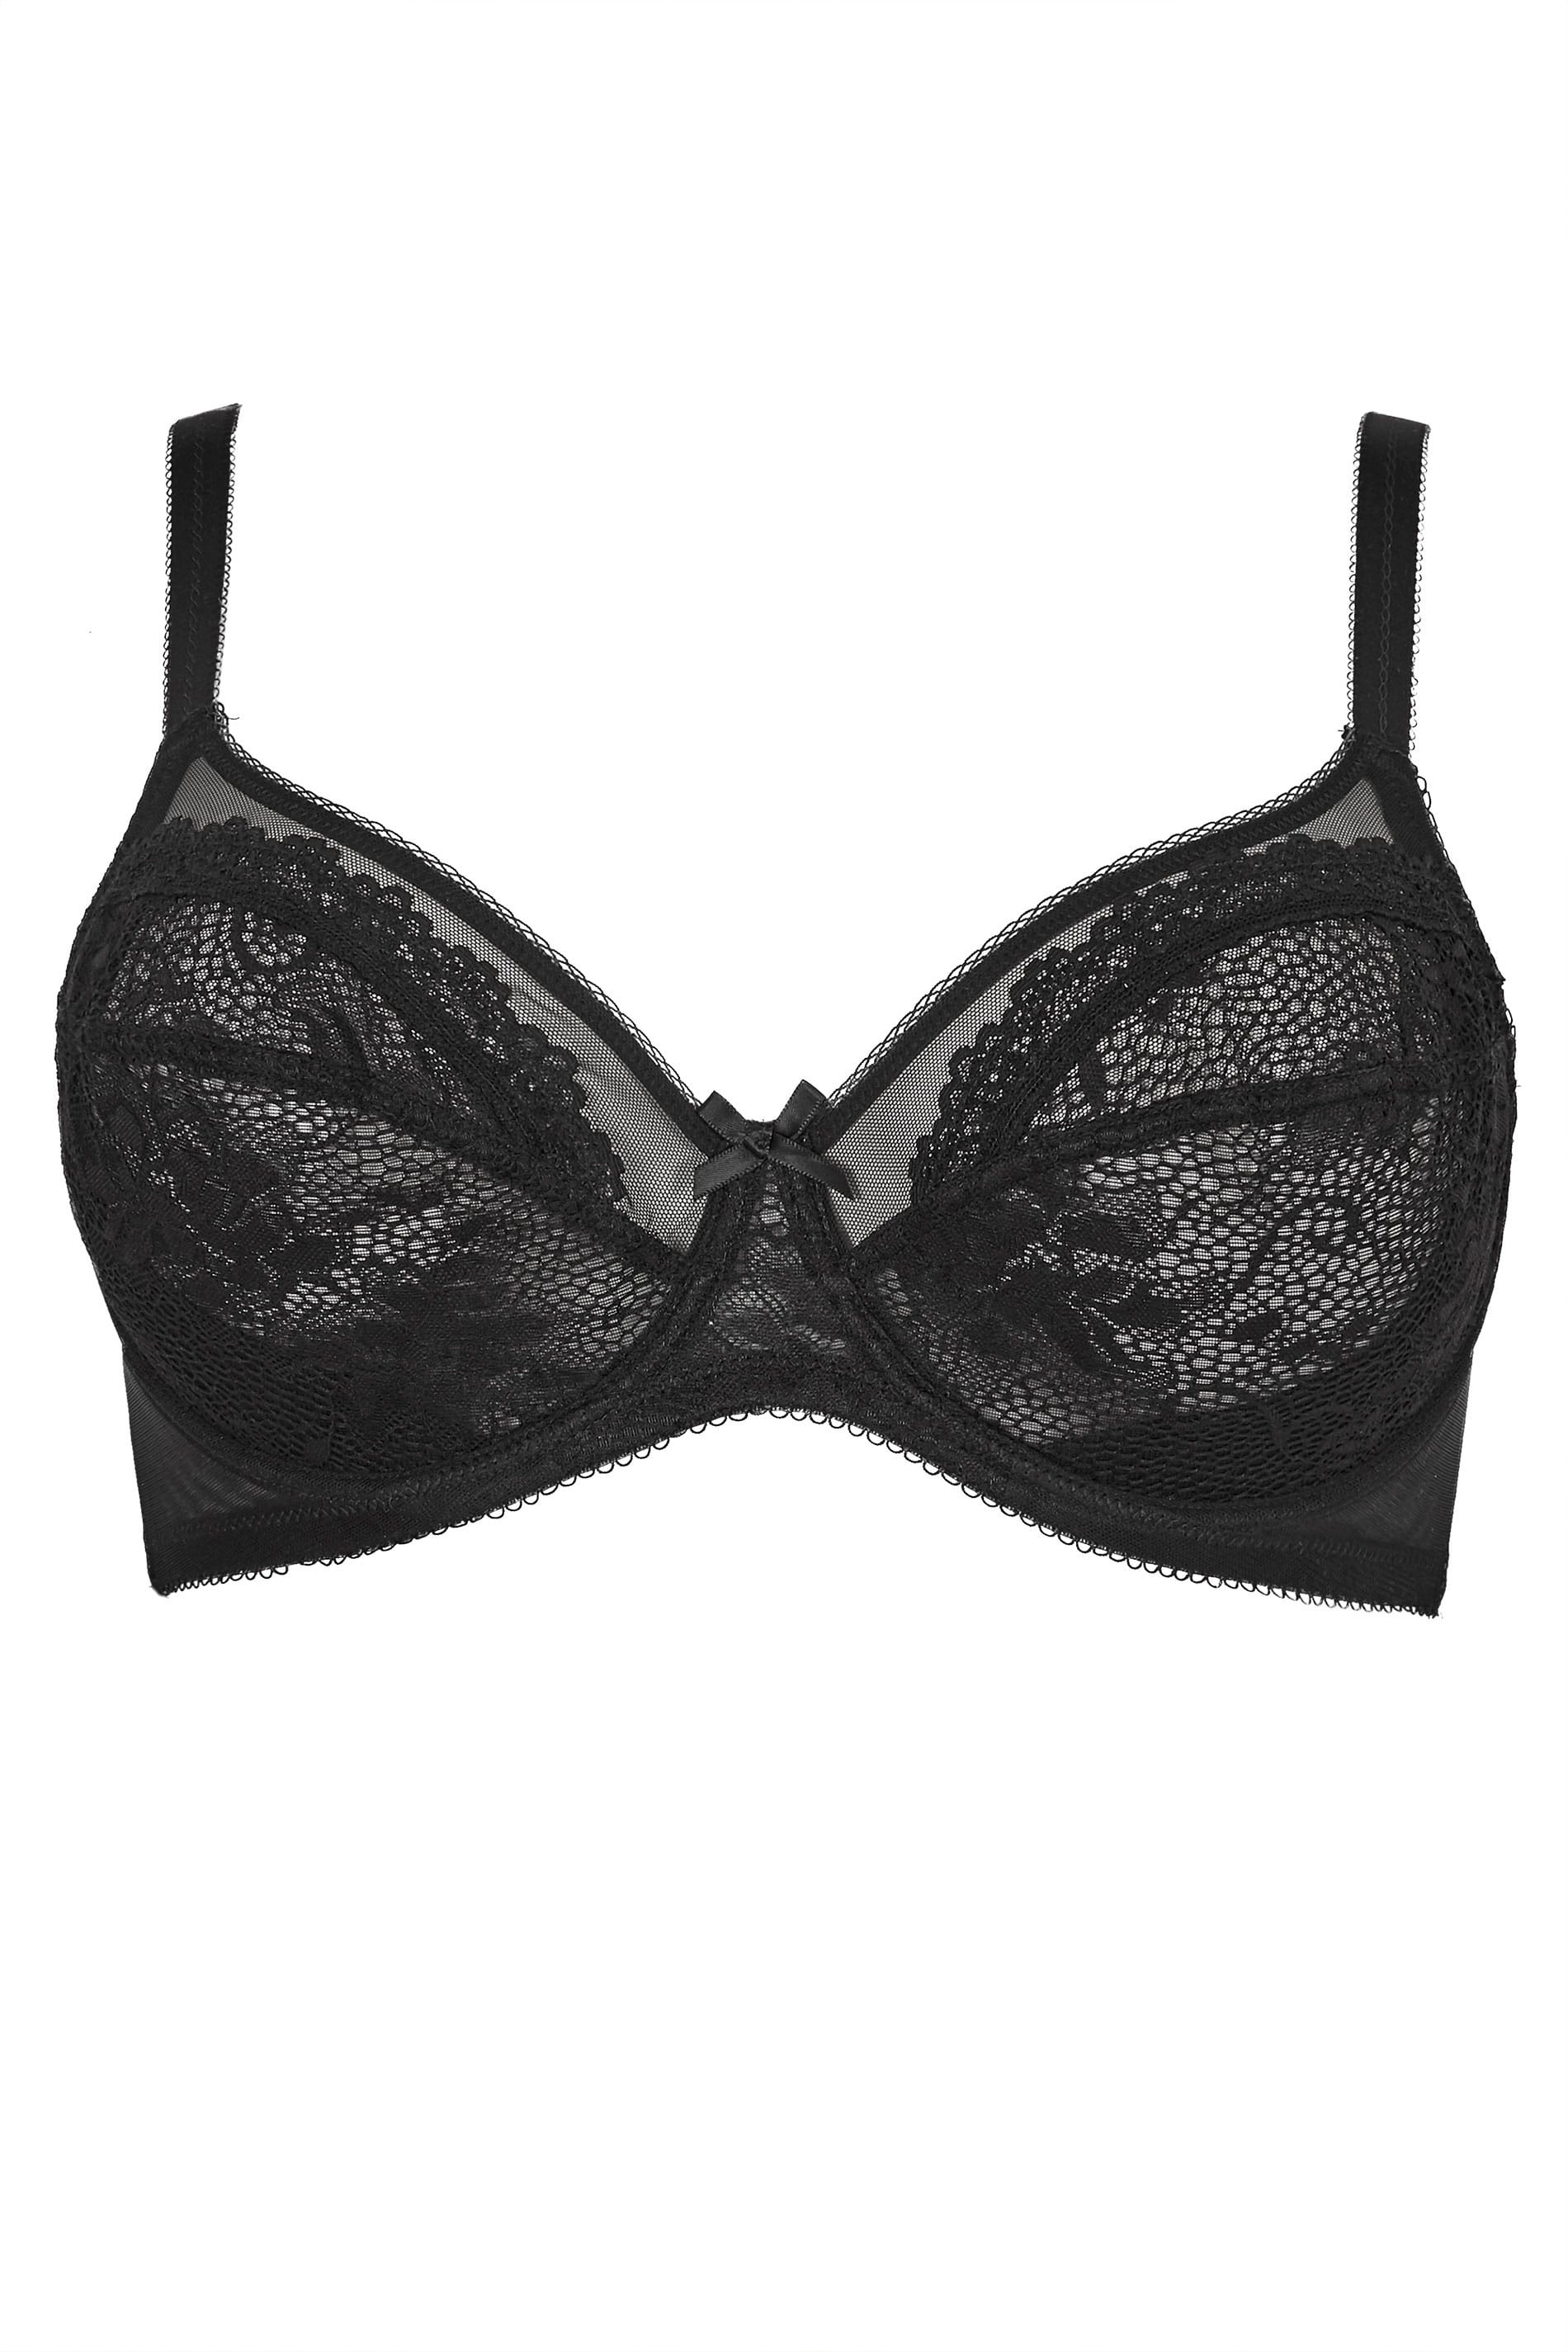 Black Floral Lace And Mesh Underwired Bra Plus Sizes 38dd To 48g Yours Clothing